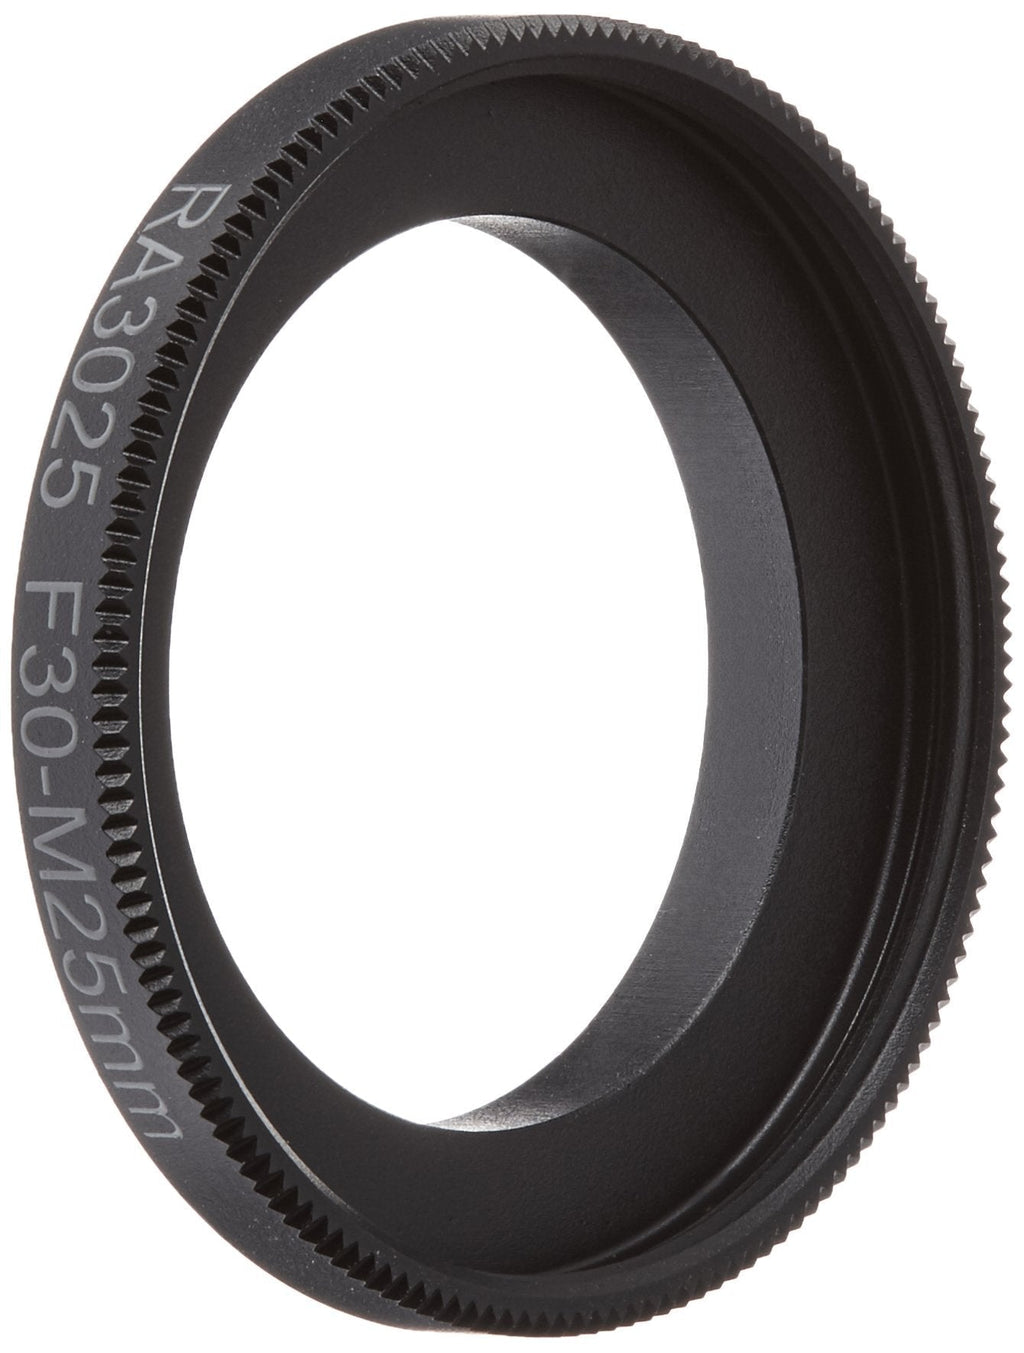 Adapter ring F30-M25mm: for 25mm filter size camera